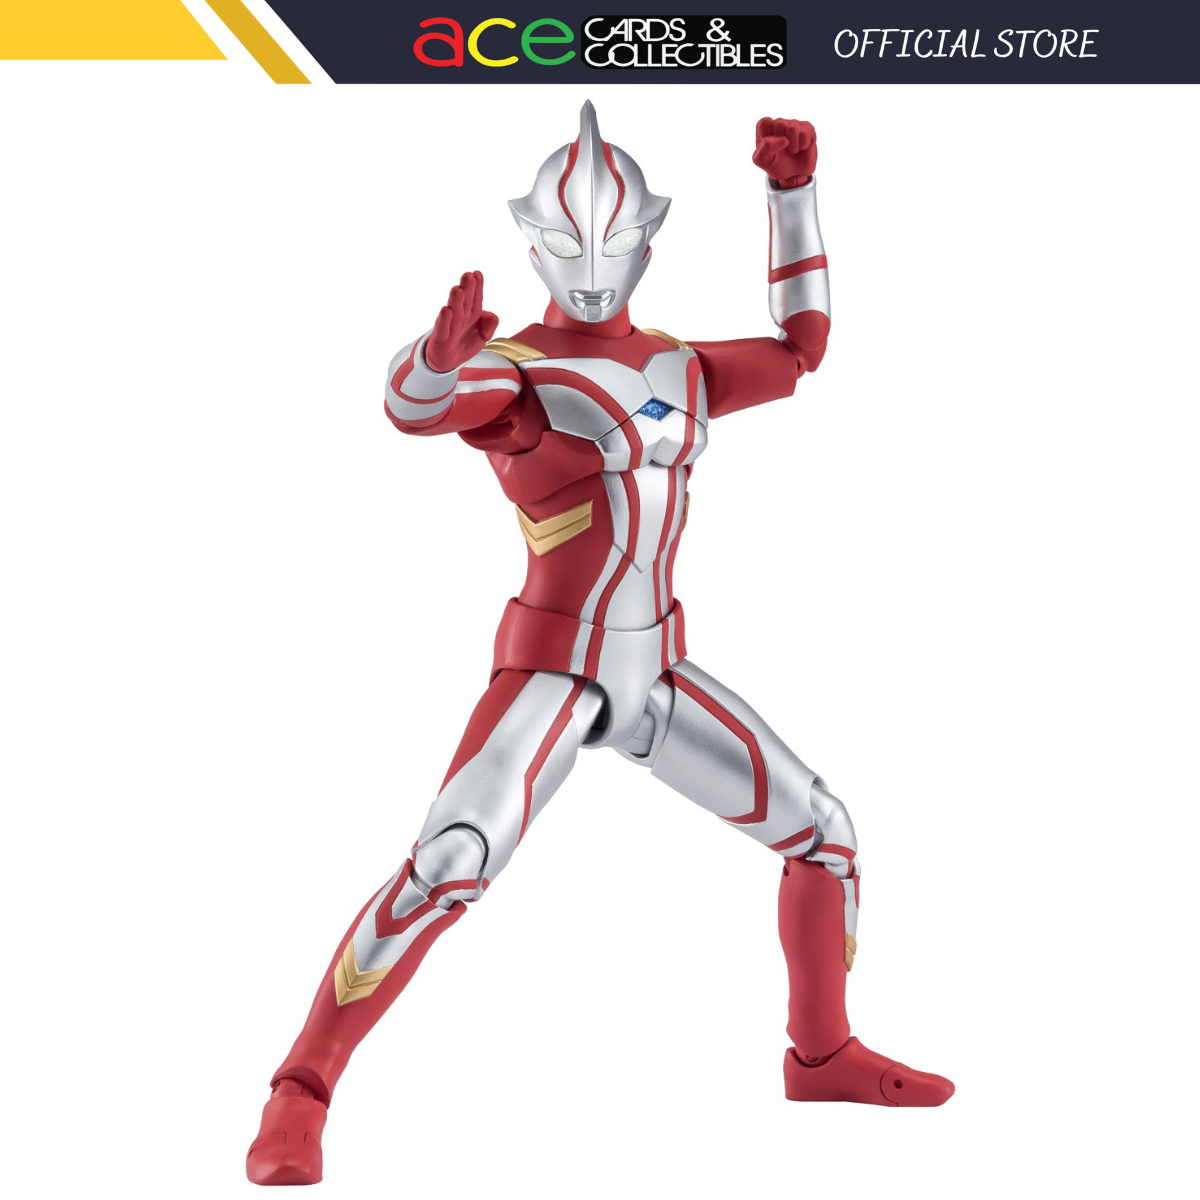 Ultraman S.H.Figuarts "Mebius"-Tamashii-Ace Cards & Collectibles